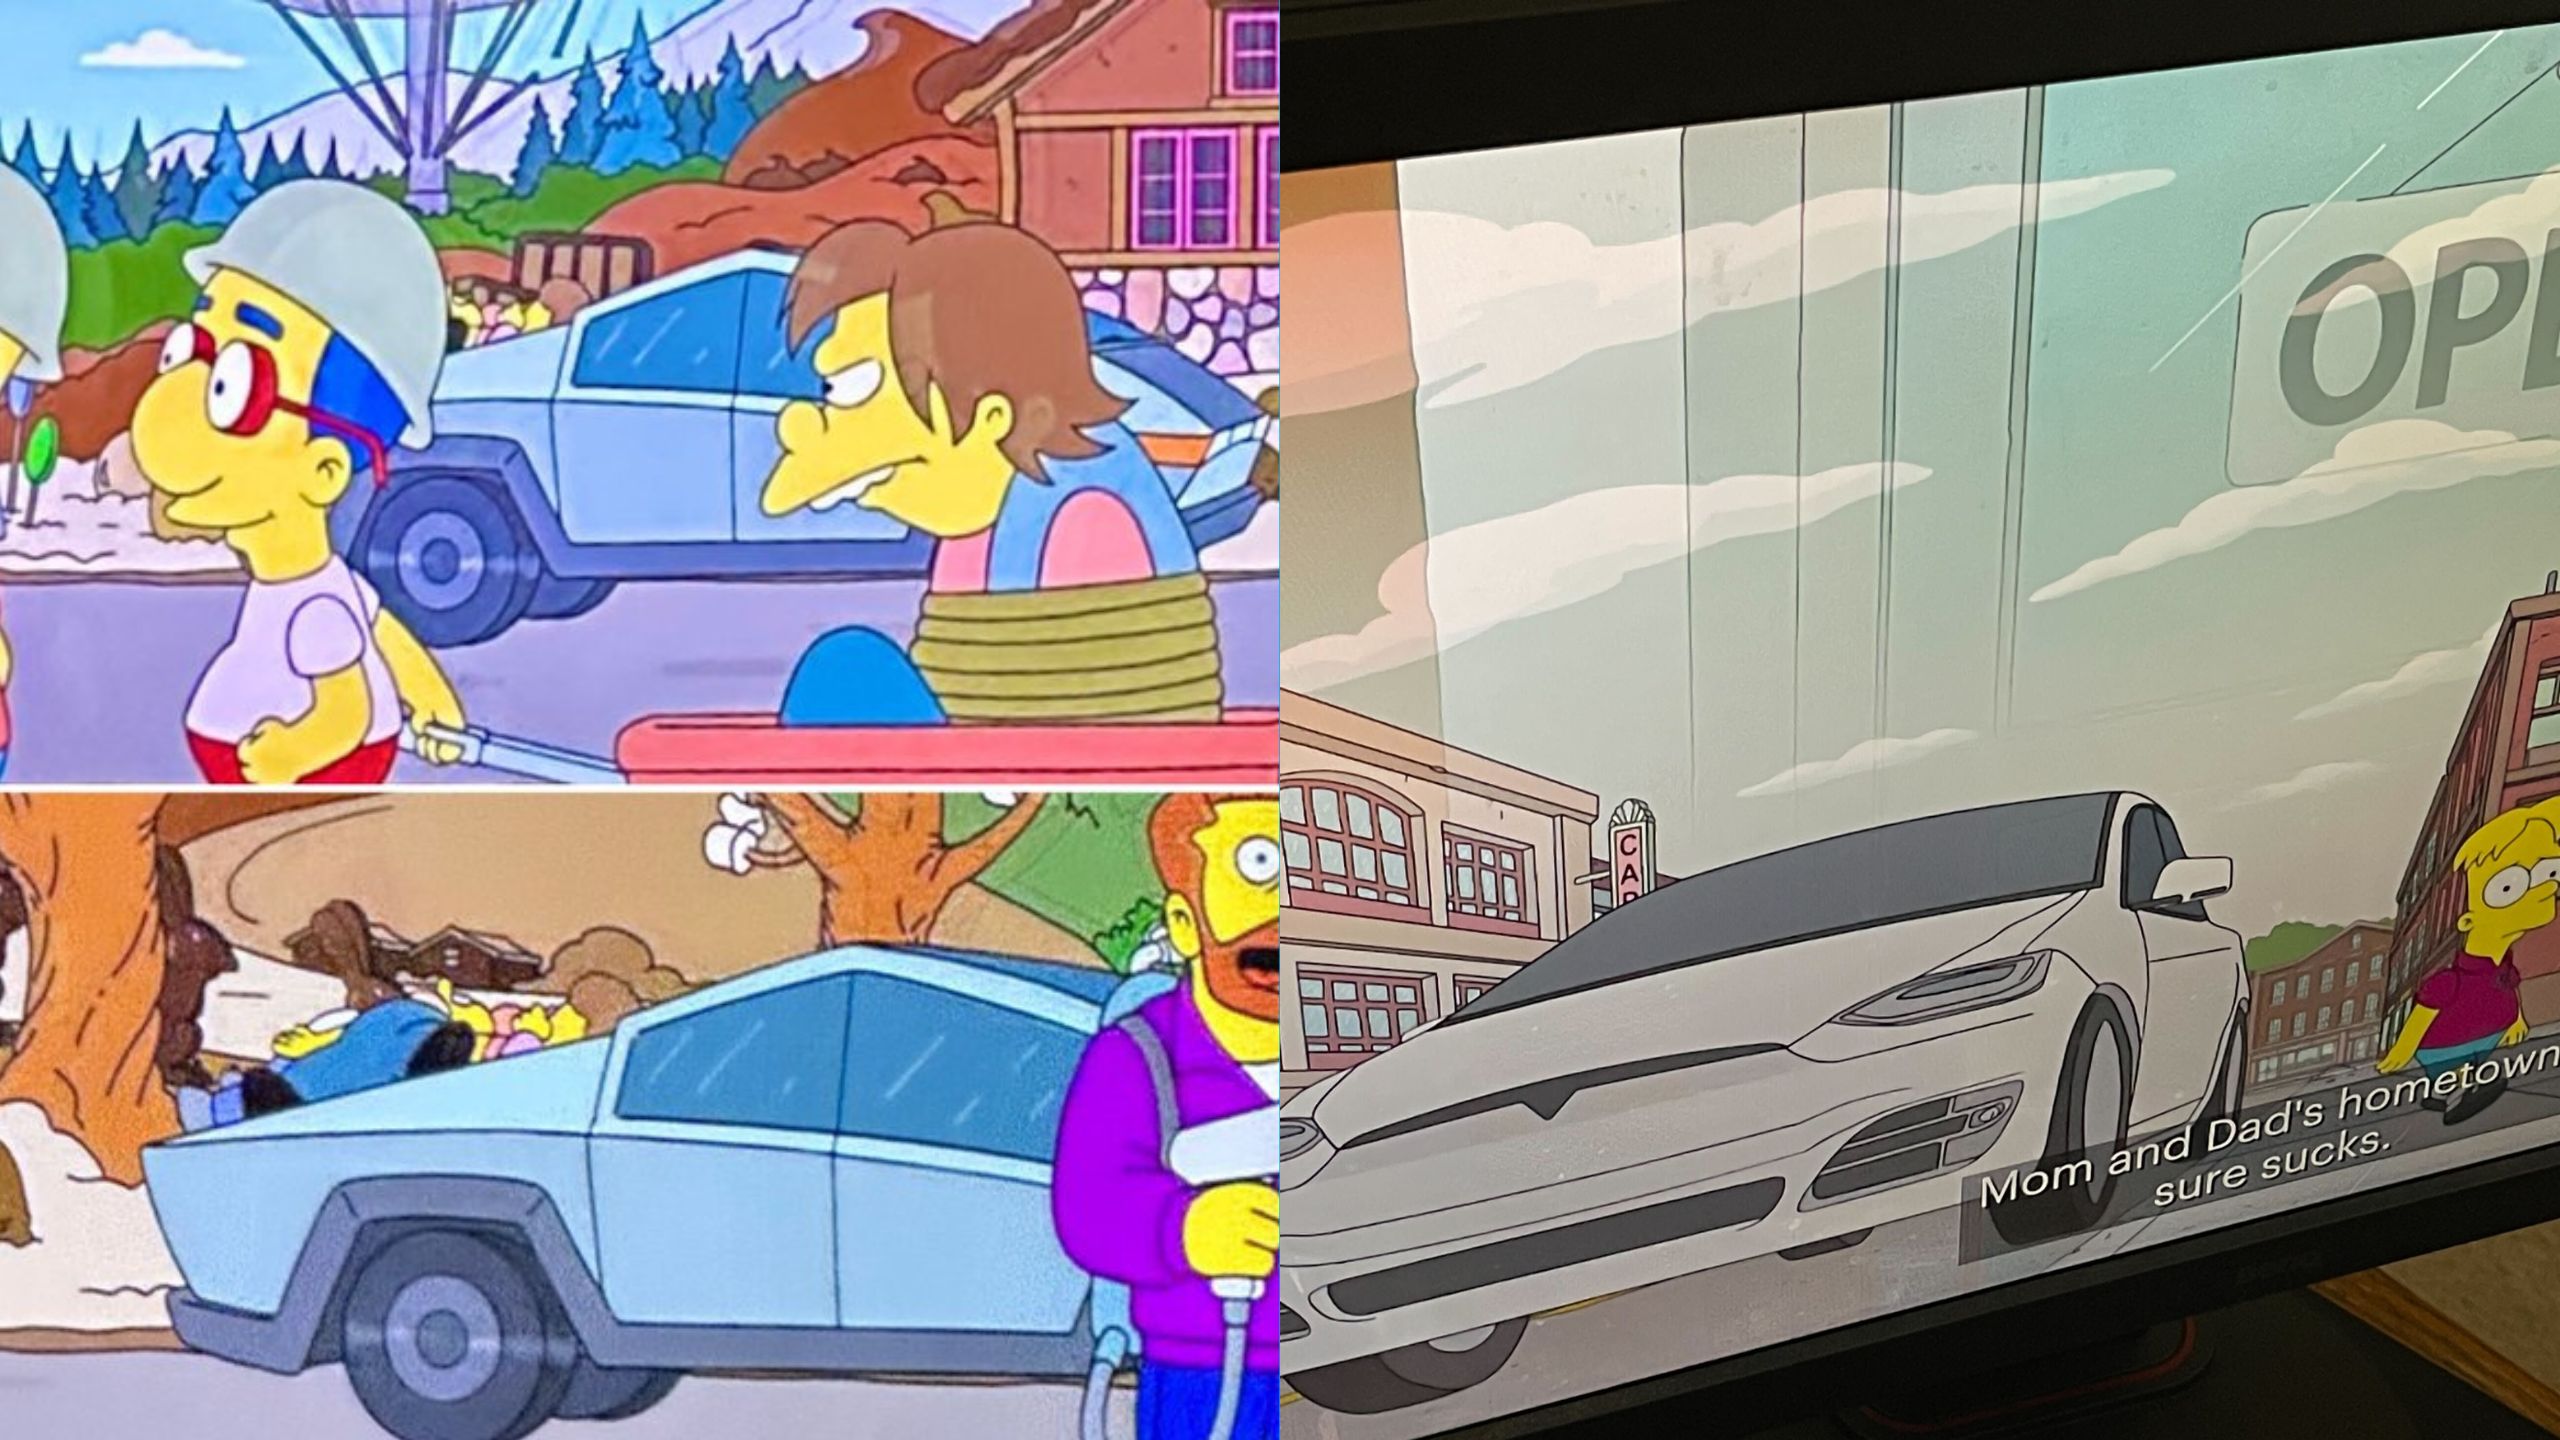 Tesla Cybertruck & Model X make cameo appearances in Halloween episodes of The Simpsons 2